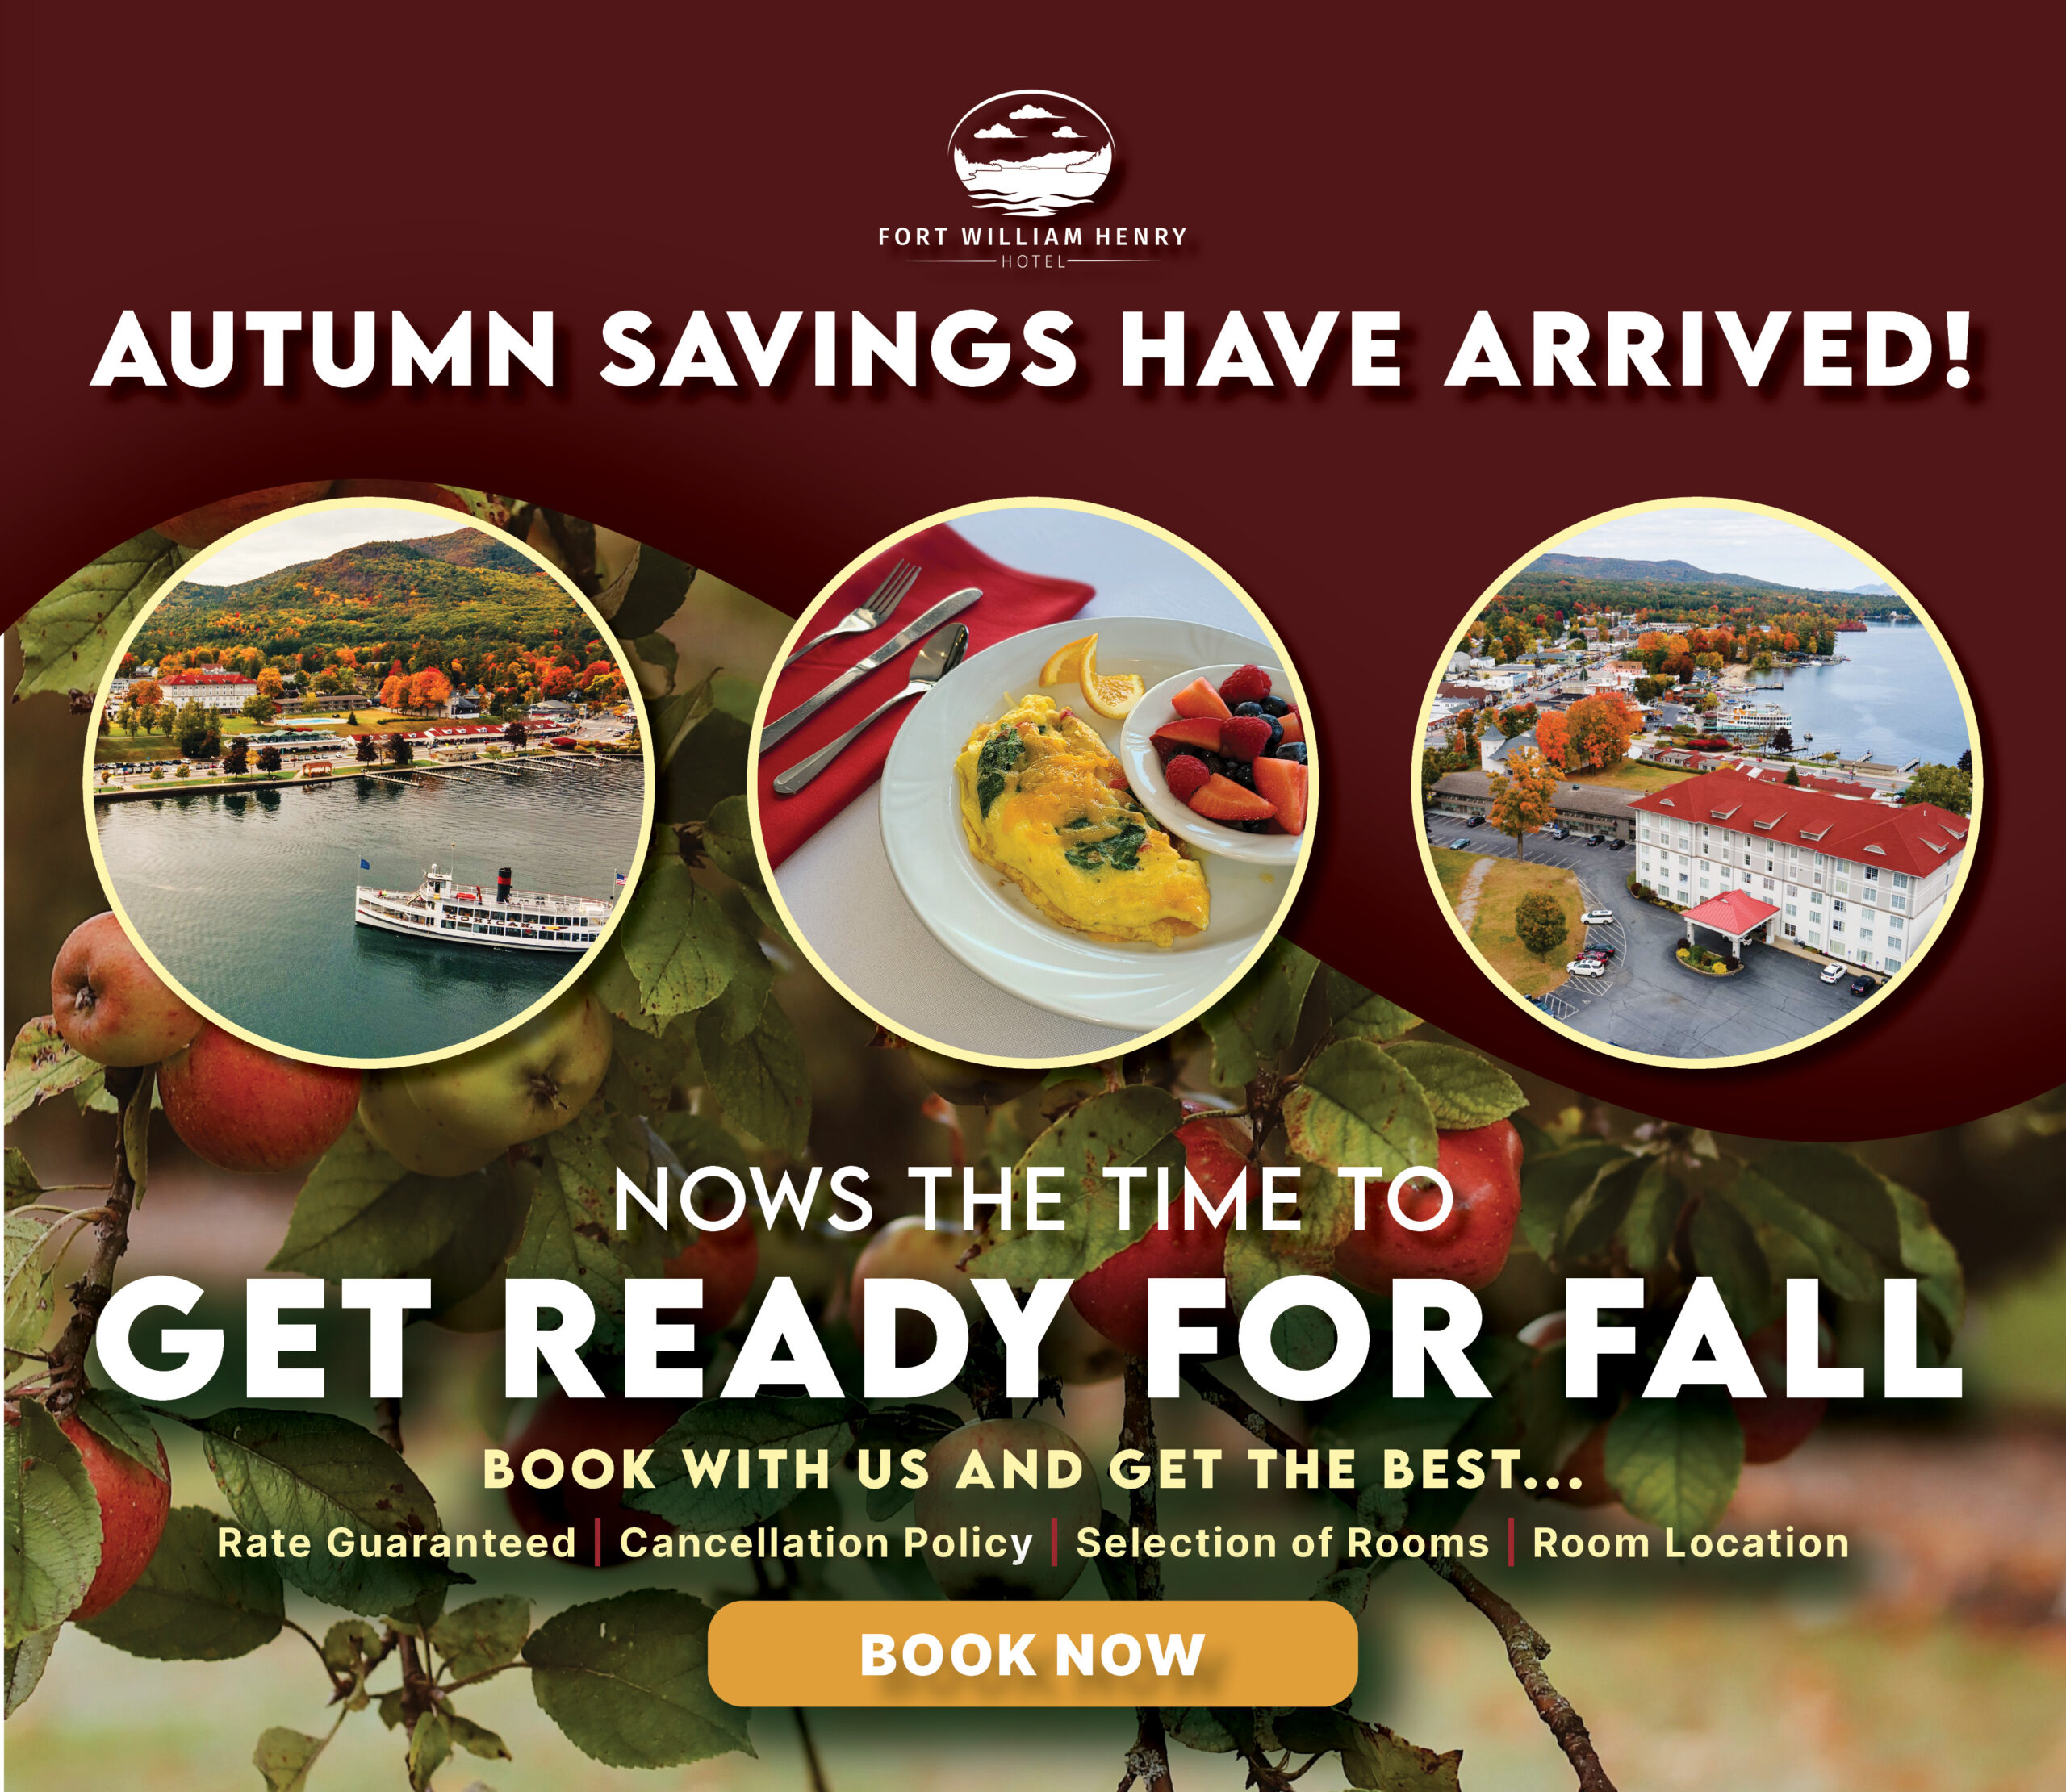 POP-UP AD URGING PEOPLE TO BOOK DIRECT FOR FALL